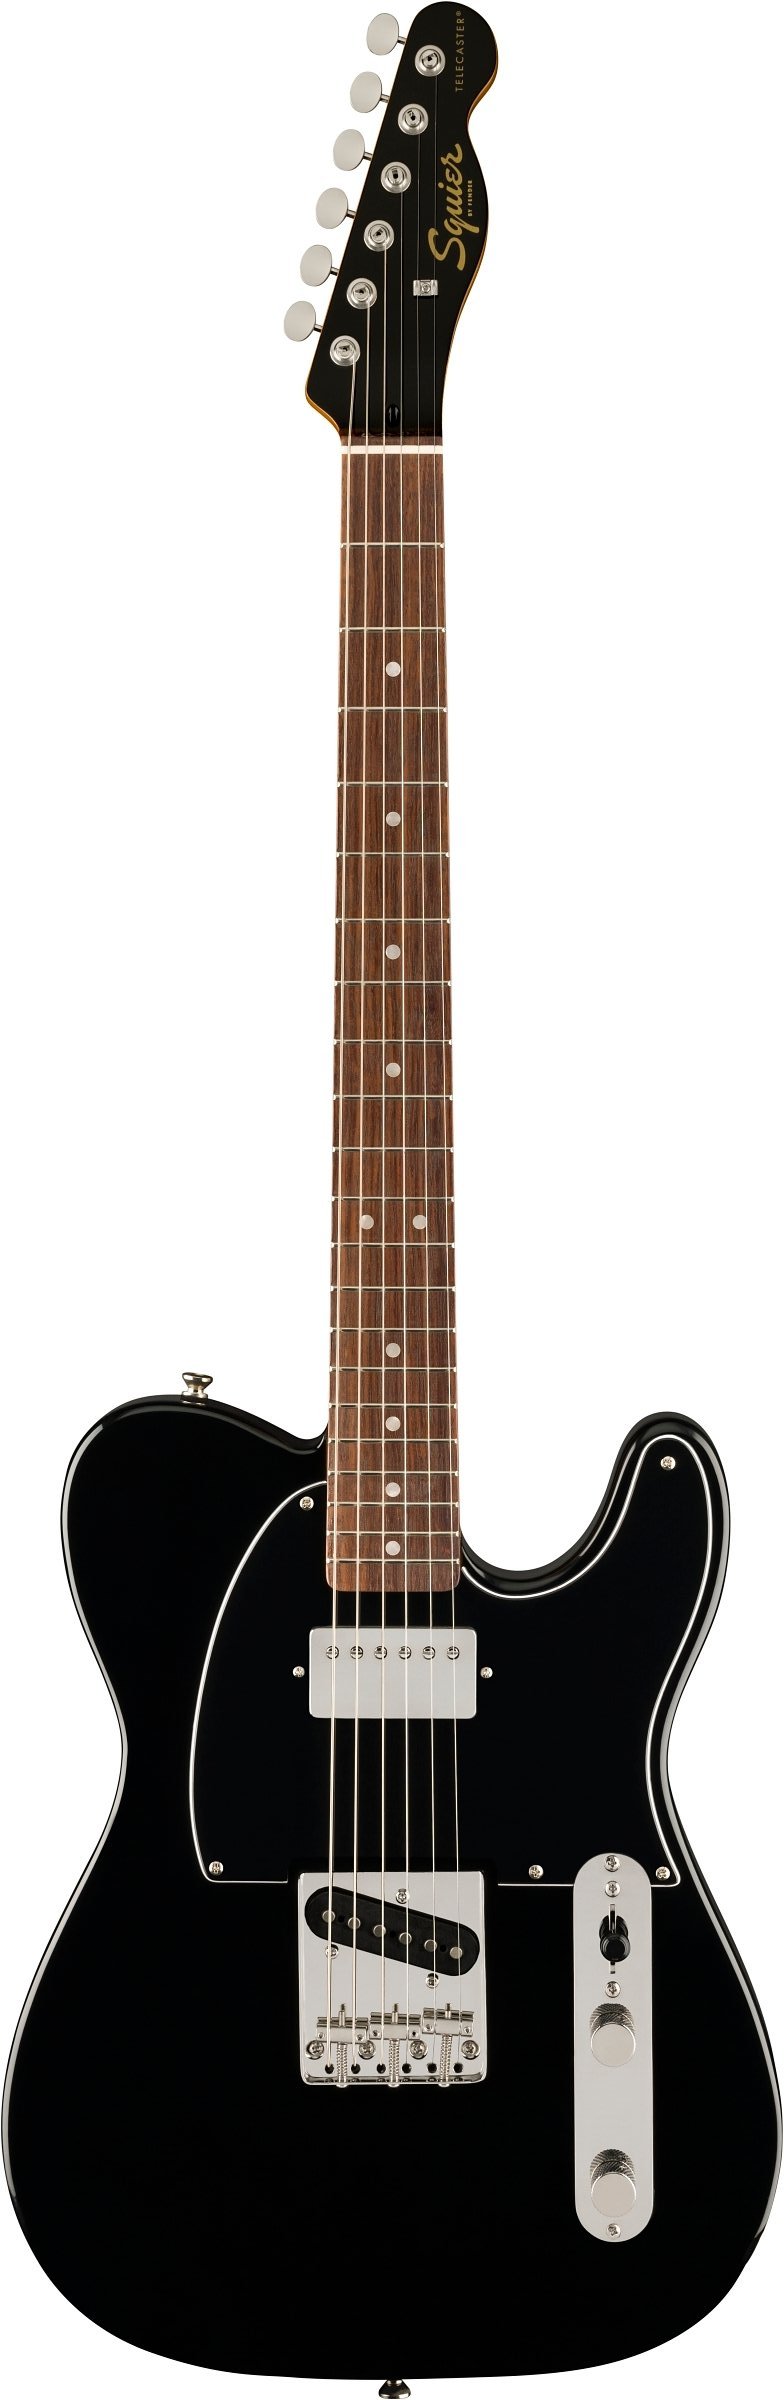 Squier Limited-edition Classic Vibe '60s Telecaster SH Electric Guitar - Black